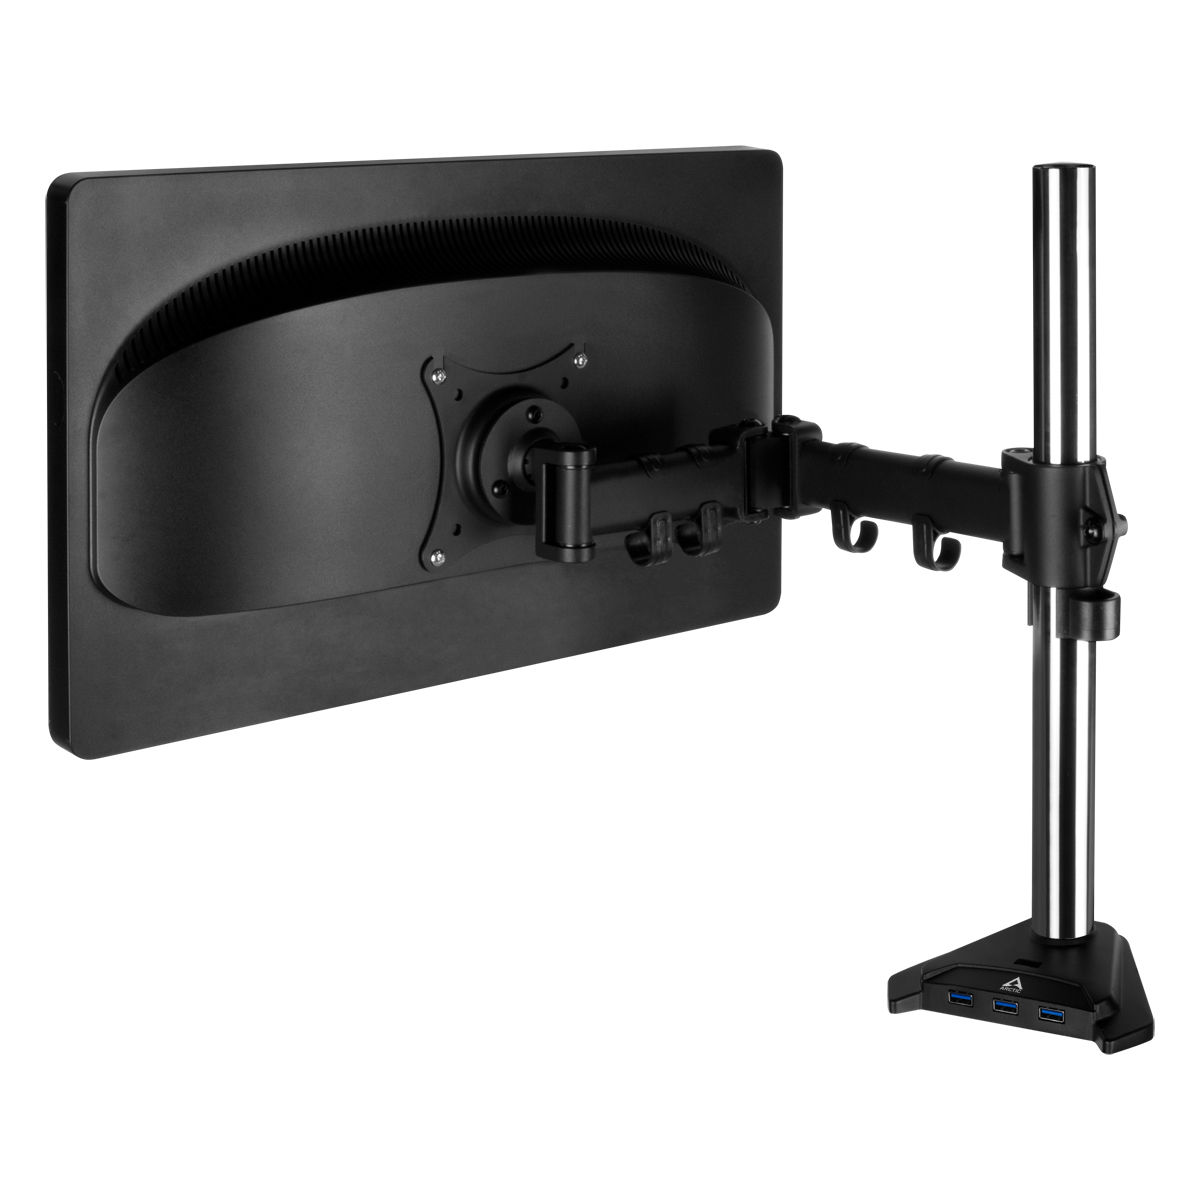 Monitor with Desk Mount Monitor Arm ARCTIC Z1 Pro (Gen 3)